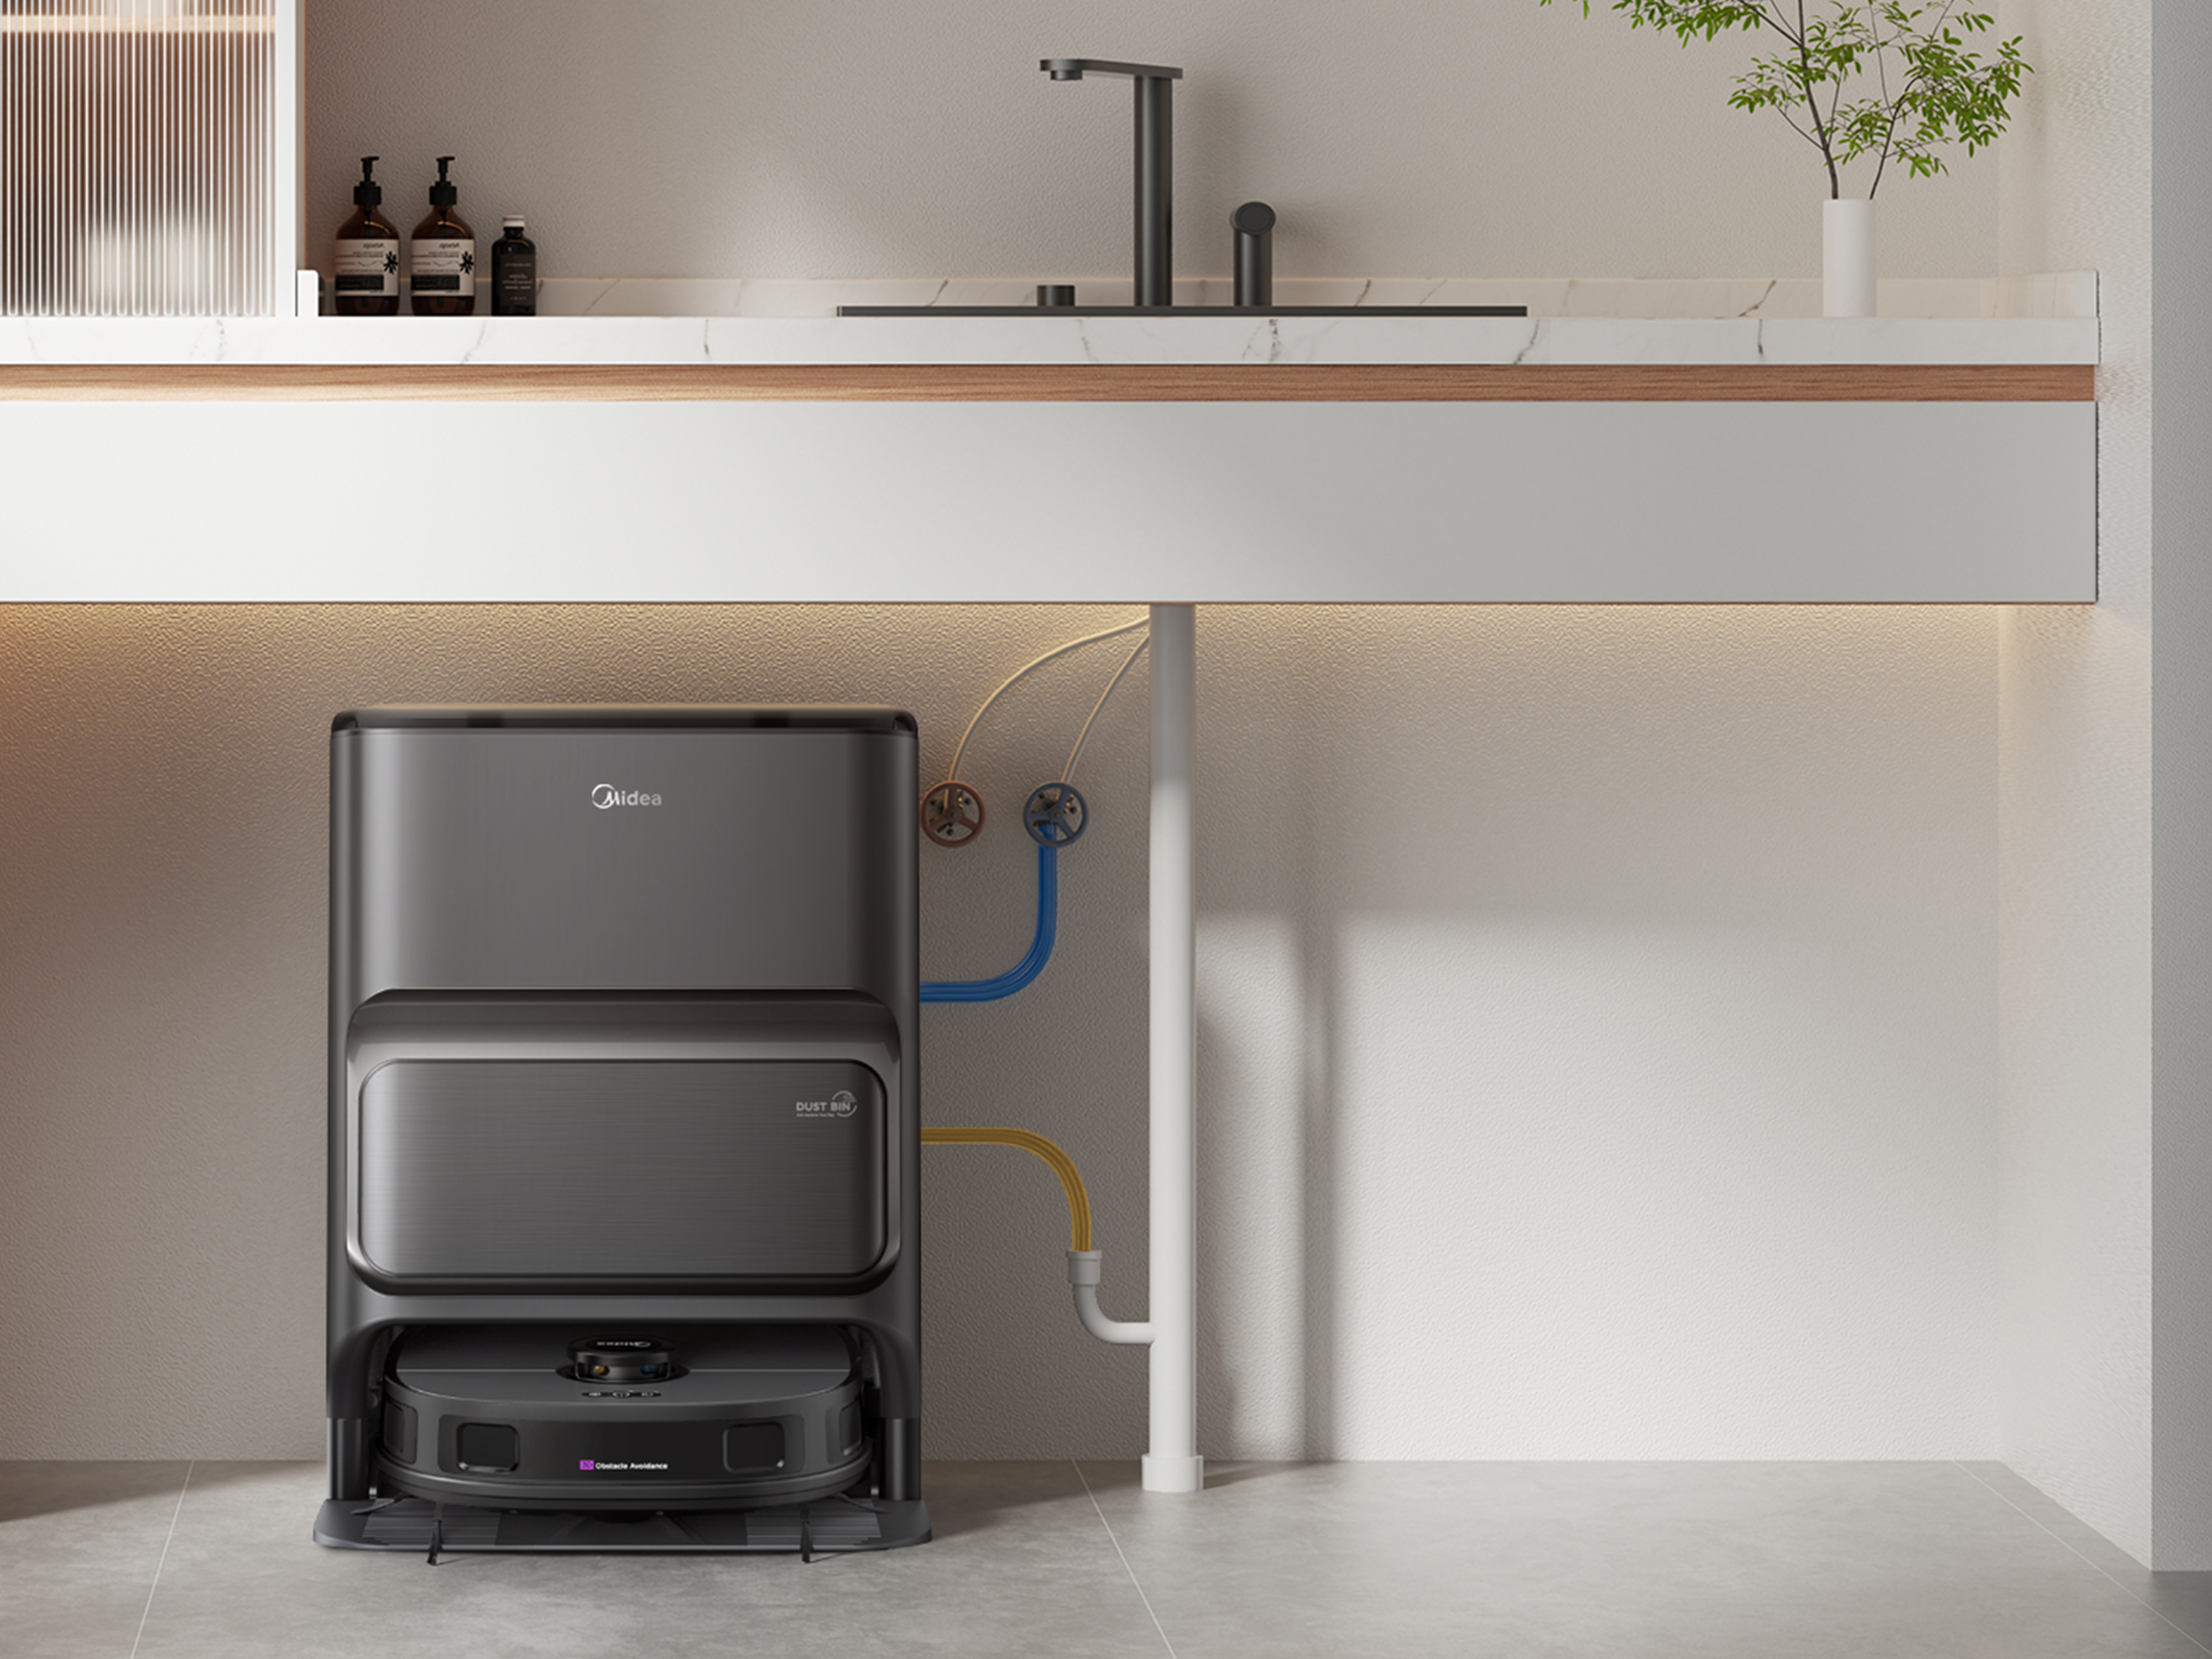 Midea W12 Robot Cleaner Station